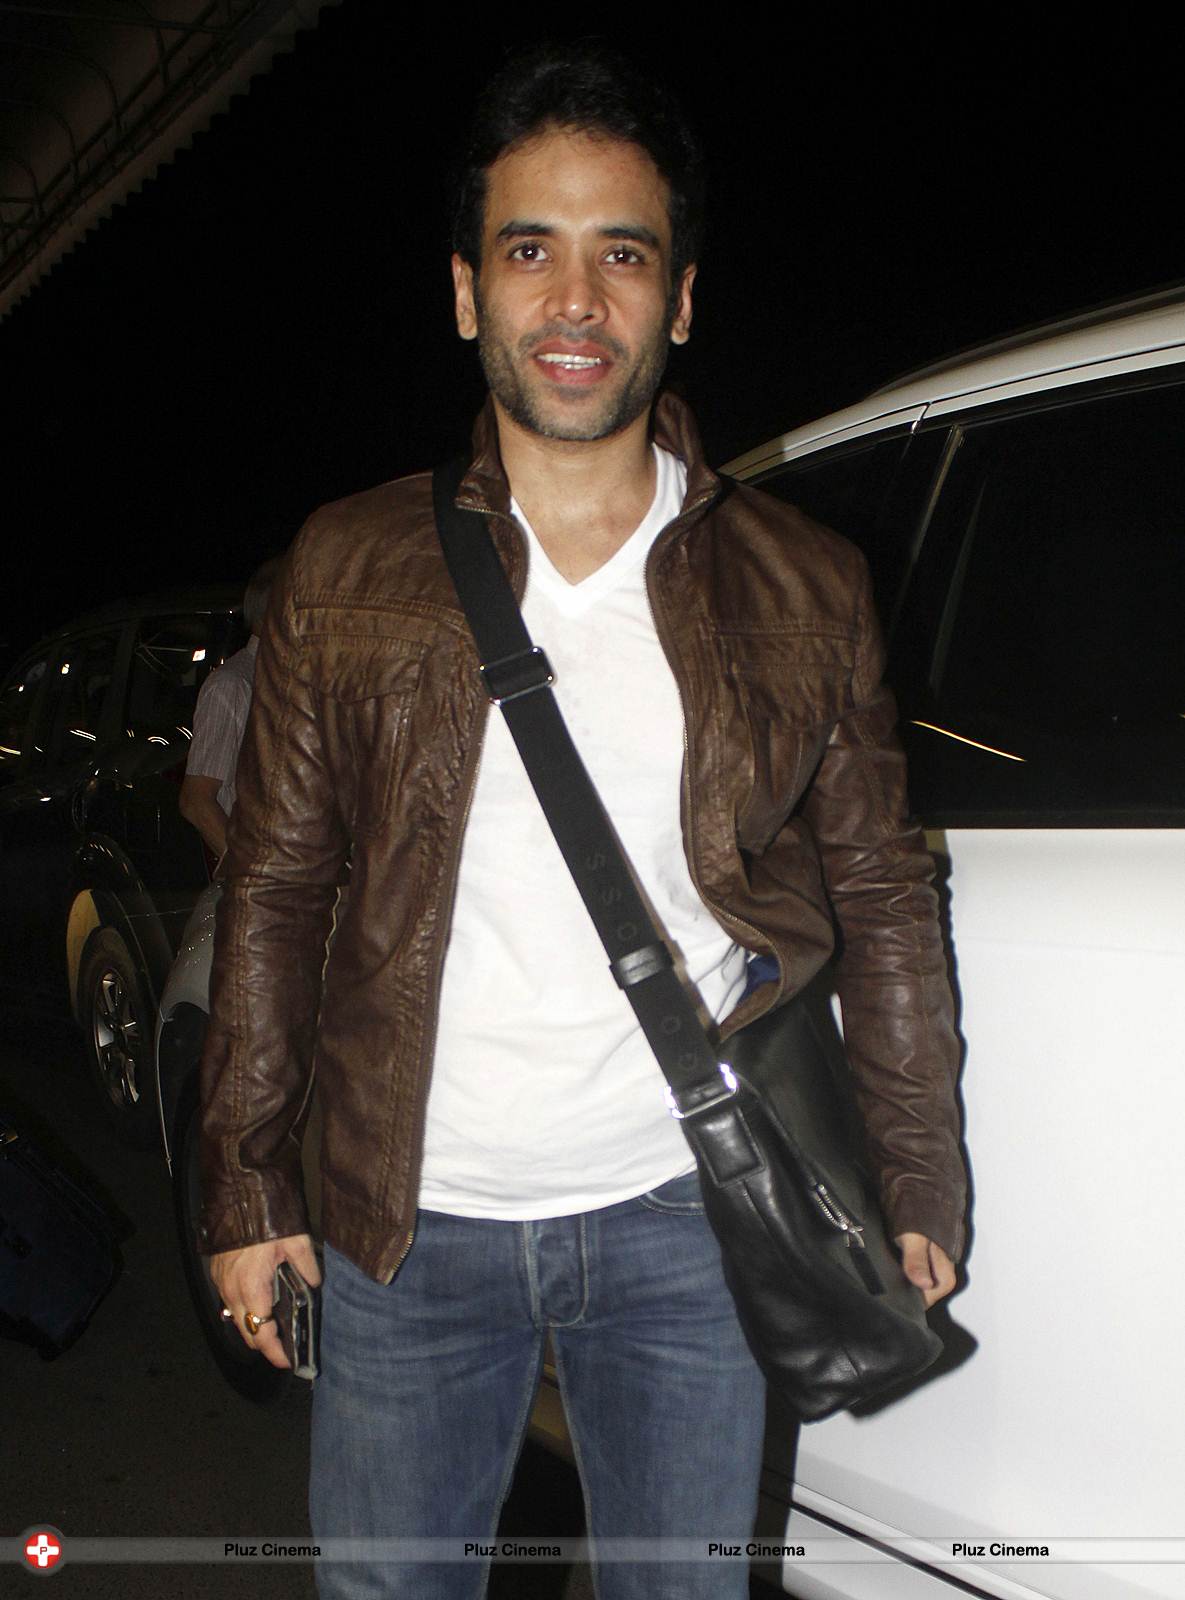 Tusshar Kapoor - Bollywood celebs to attend India Film and Television Awards Photos | Picture 561949